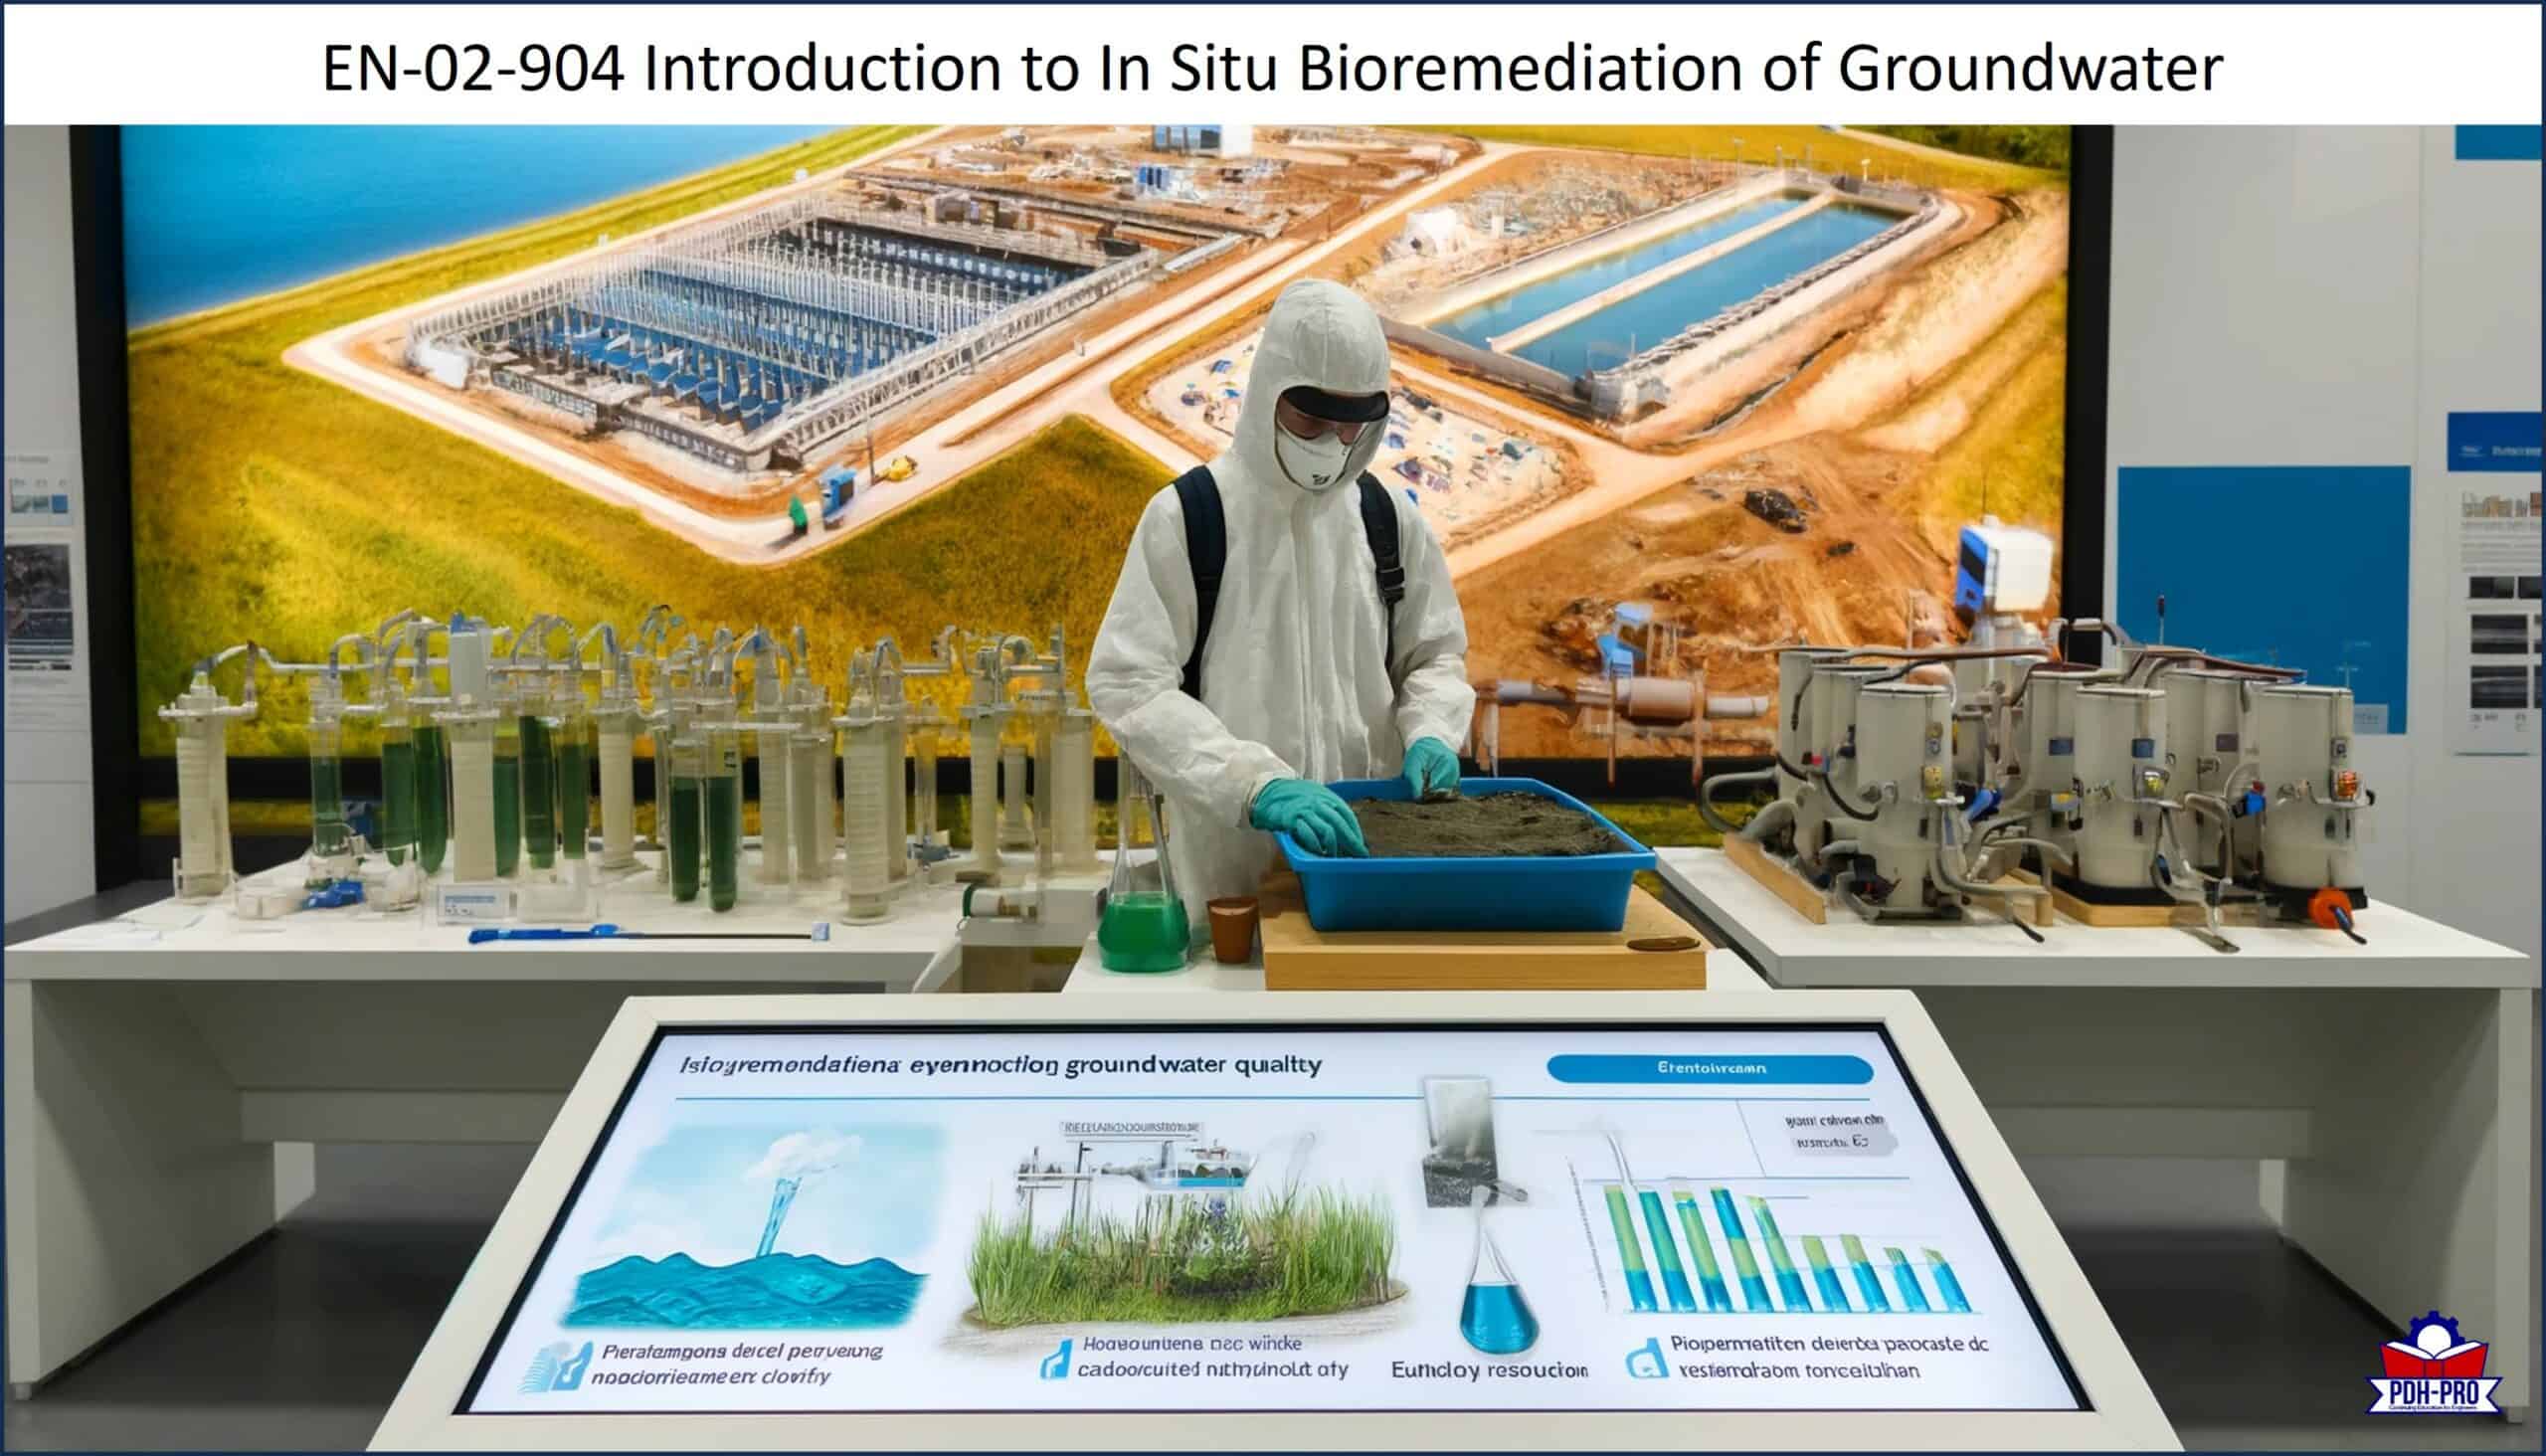 Introduction to In Situ Bioremediation of Groundwater